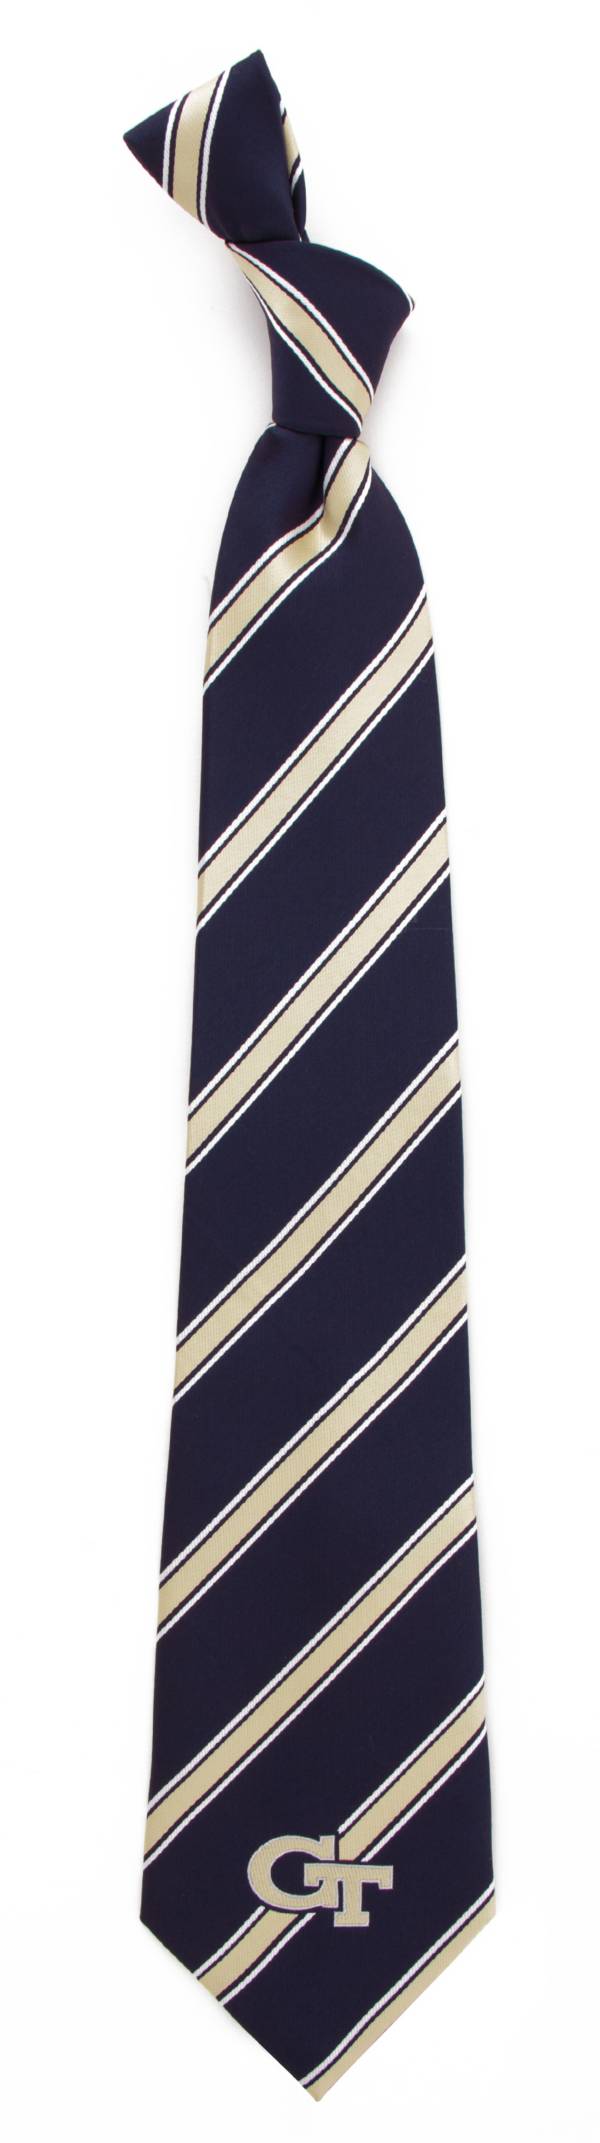 Eagles Wings Georgia Tech Yellow Jackets Woven Poly 1 Necktie product image